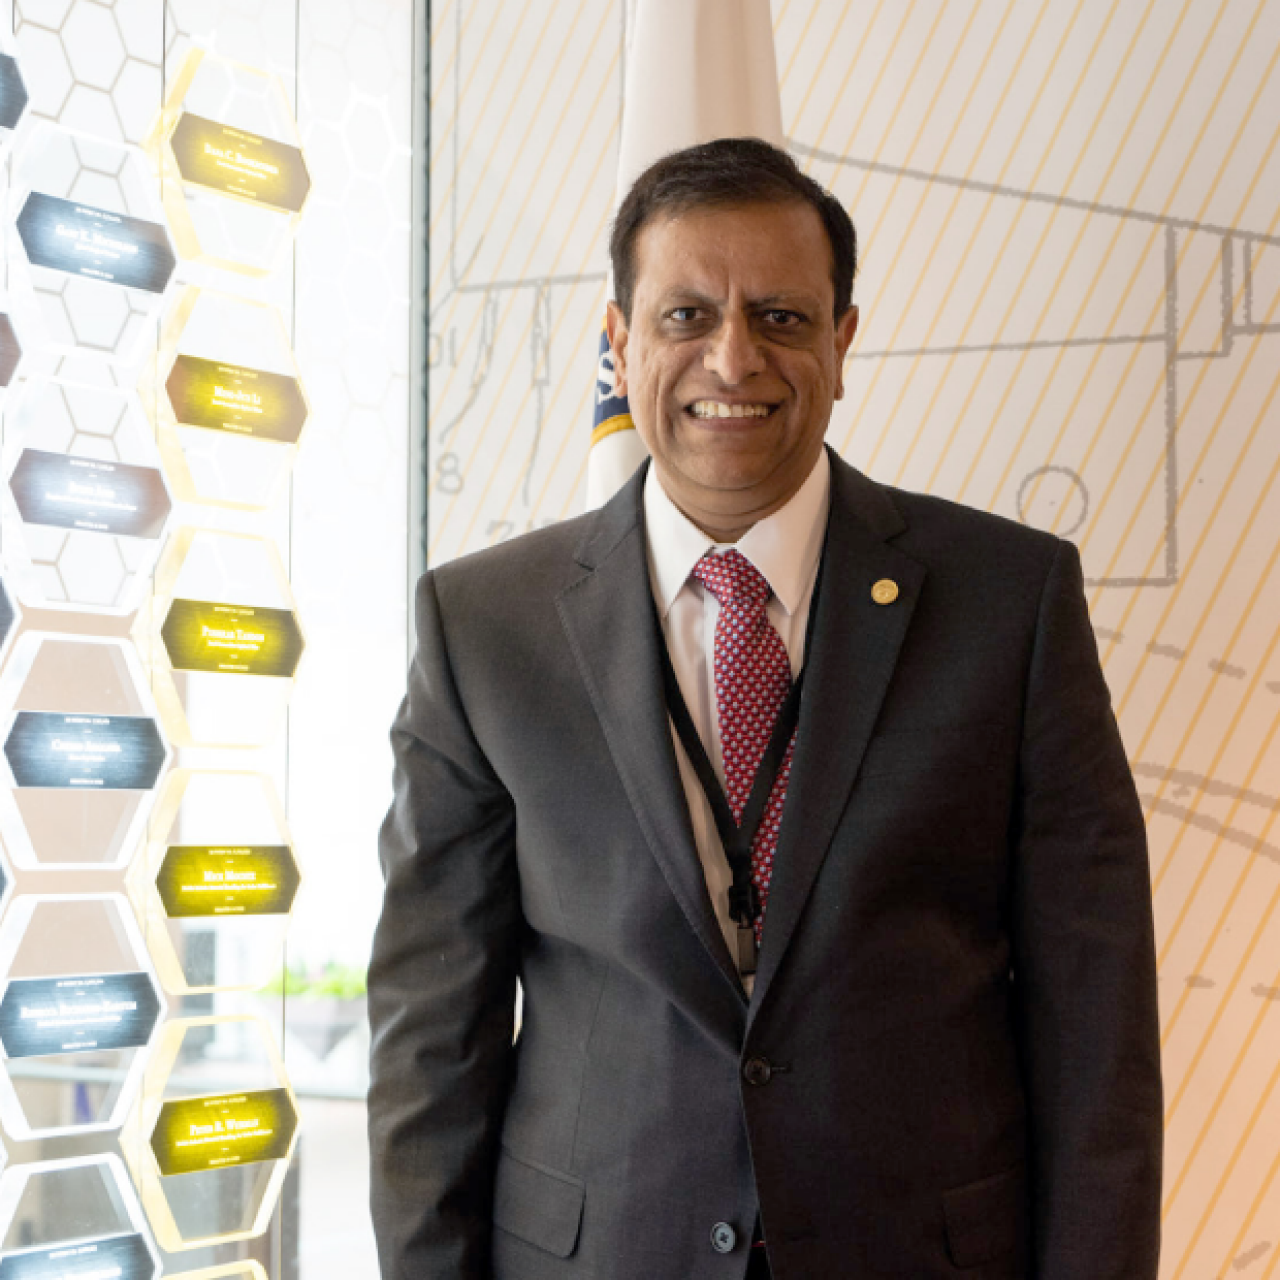 Pushkar Tandon, a chemical engineer, helped develop bendable optical fiber for Corning.